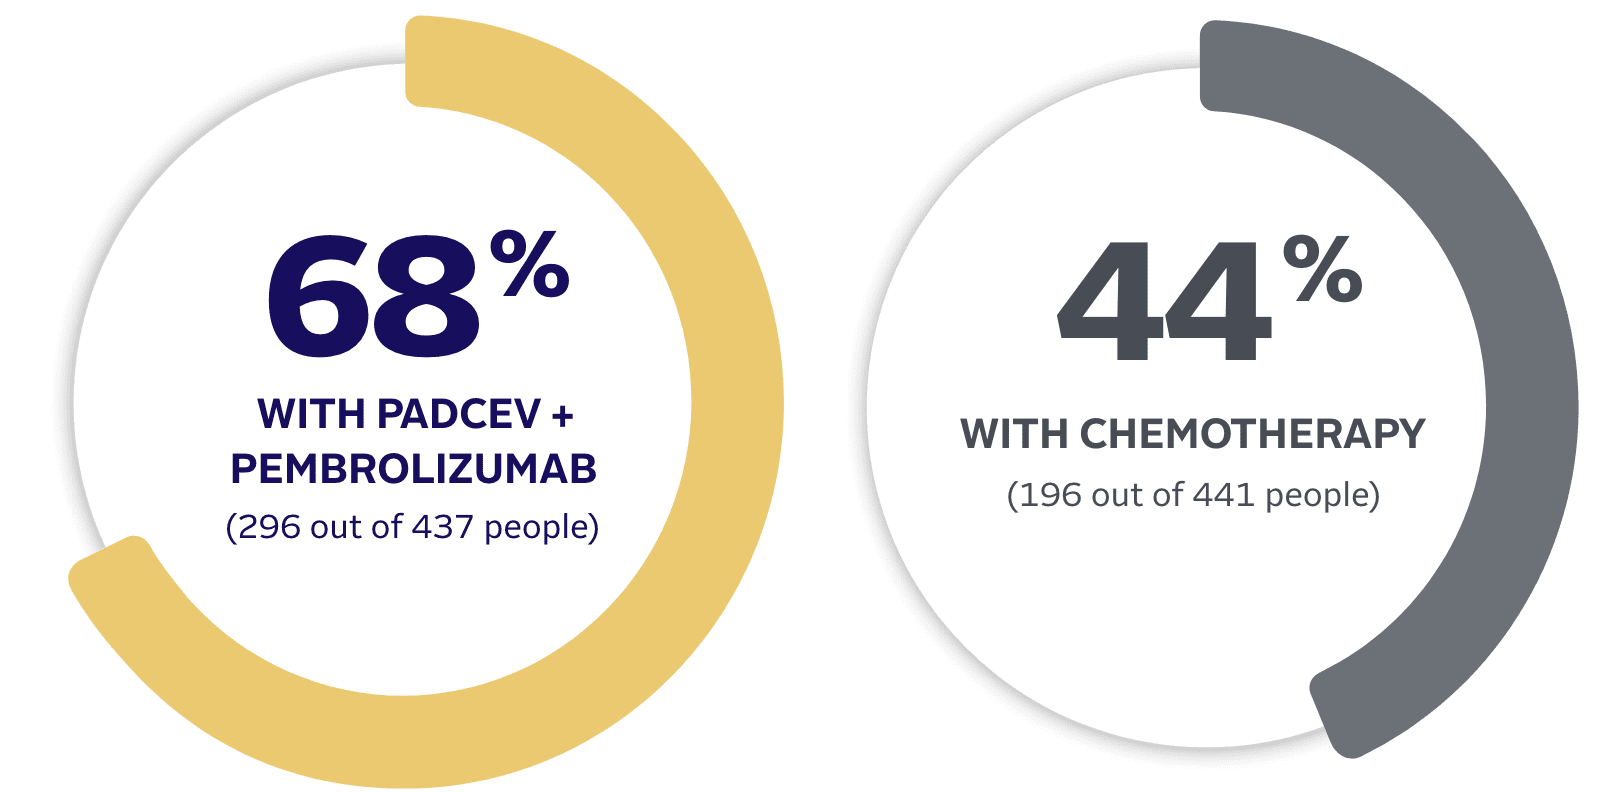 68% objective response rate with PADCEV + PEMBROLIZUMAB (296 out 437 people). 44% objective response rate with chemotherapy (196 out of 441 people).